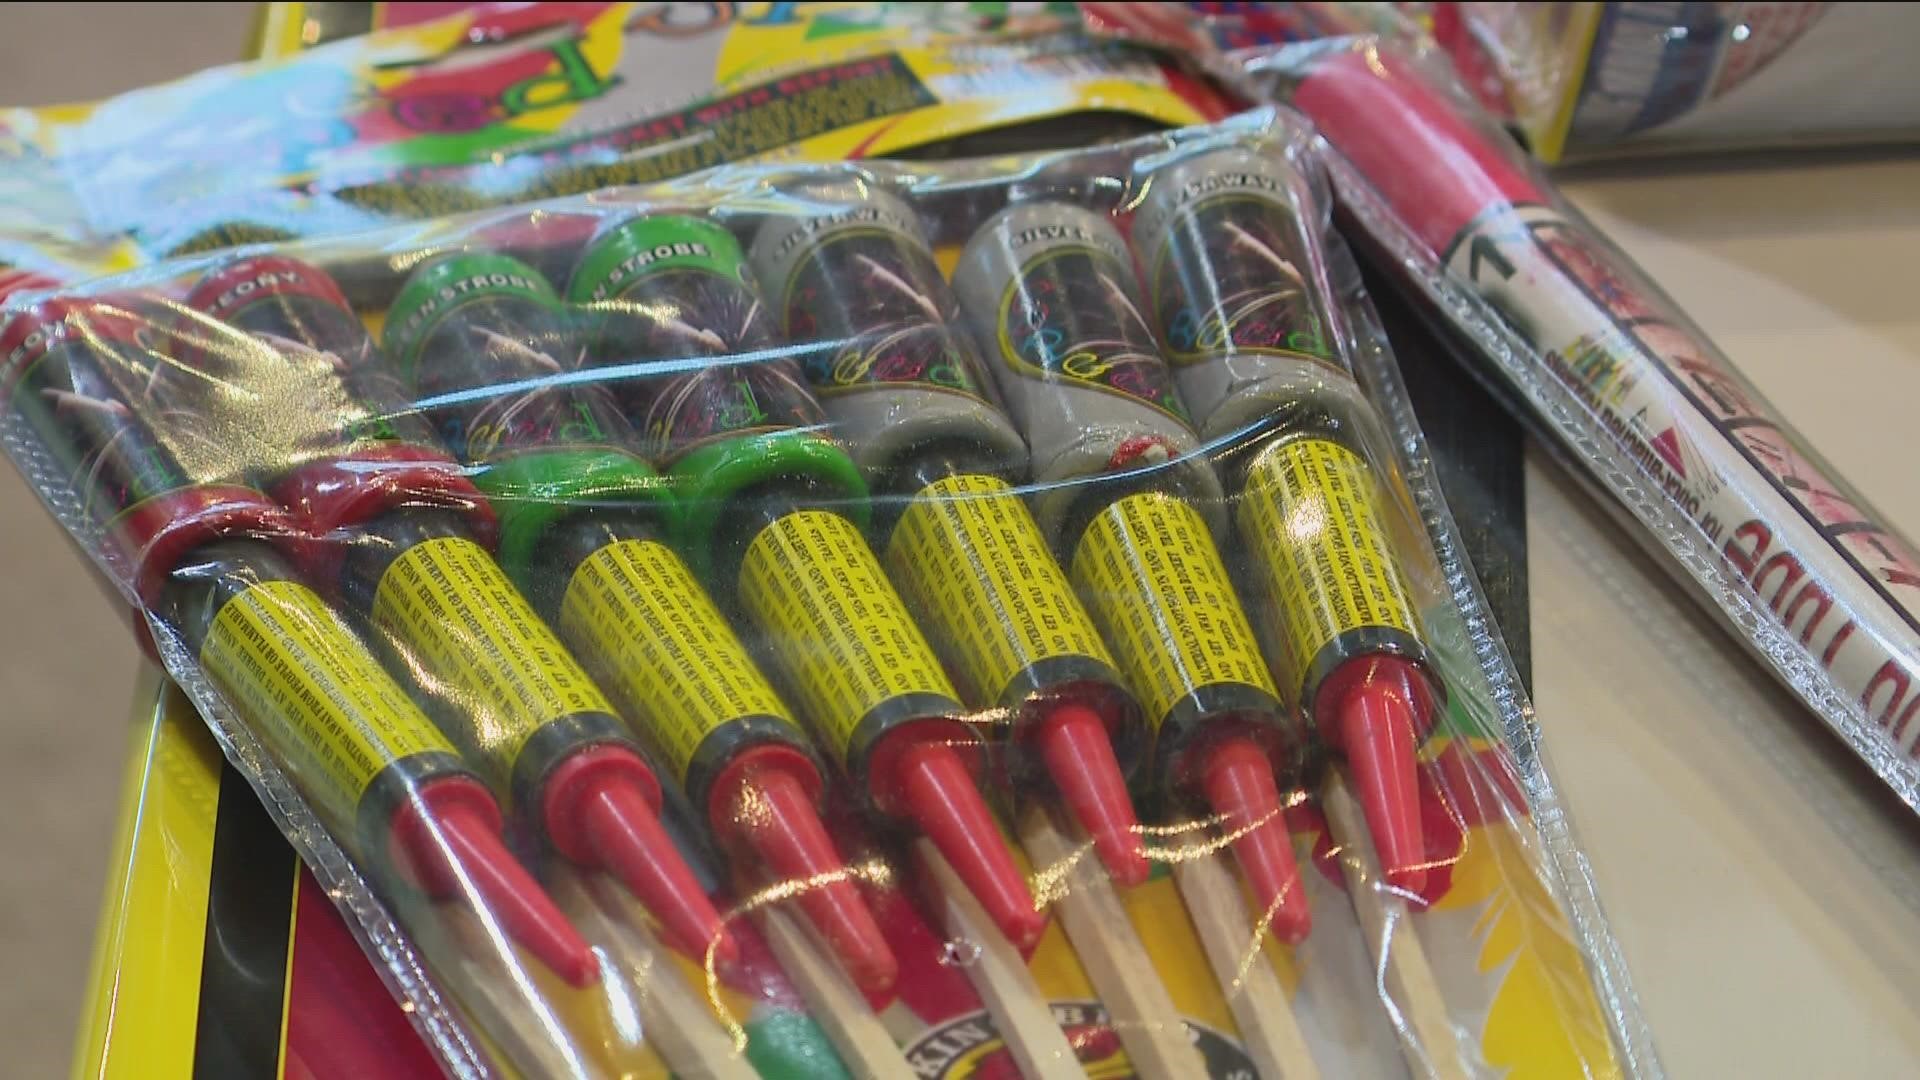 Toledo City Council voted to opt-out of the new state law, which allows Ohioans to shoot off fireworks.